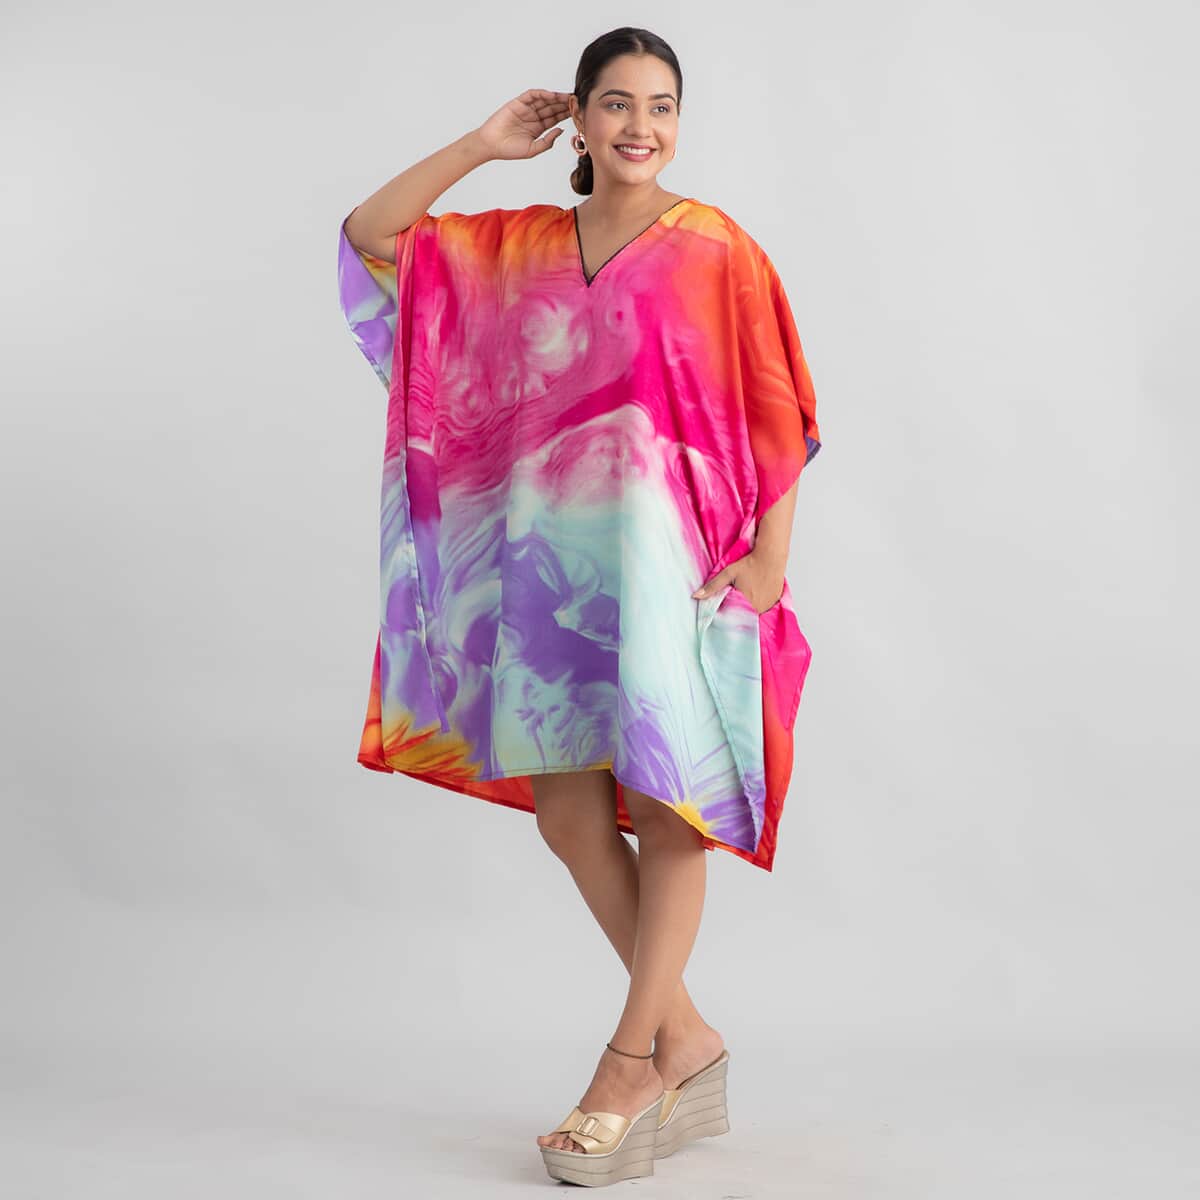 TAMSY Marble Blue Pink Screen Printed Mid Short Kaftan - One Size Fits Most (36"x41") image number 3